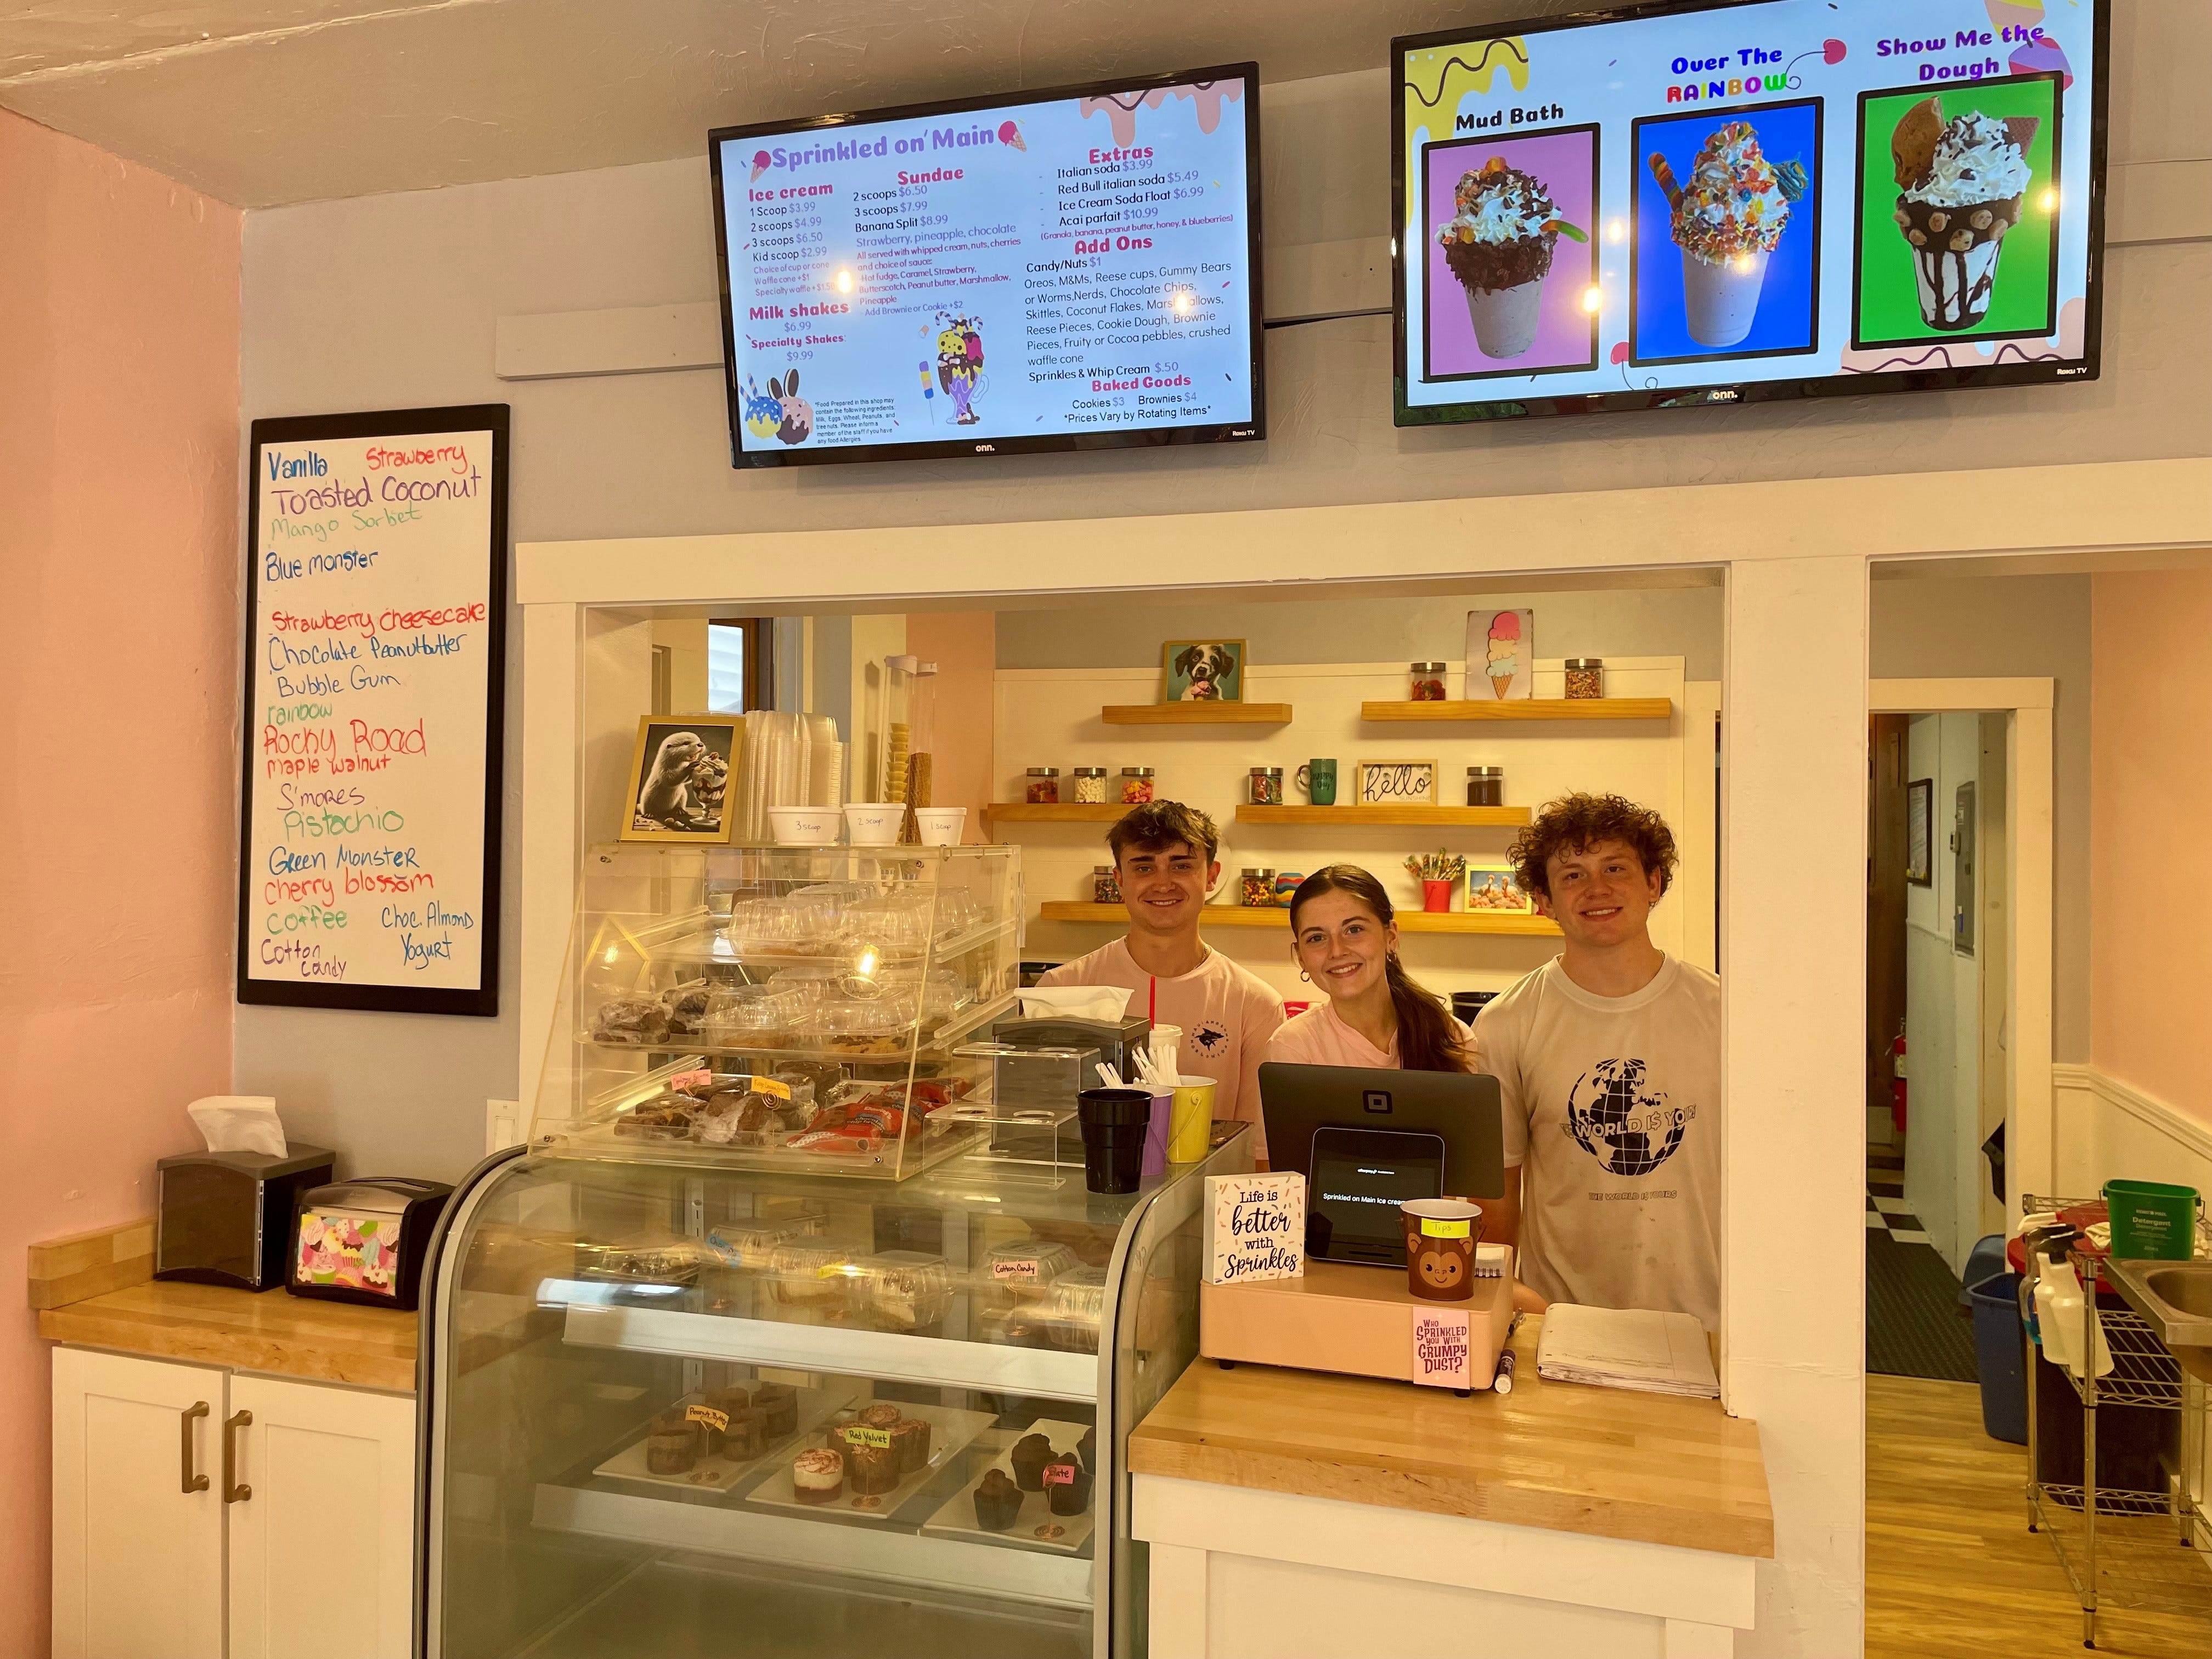 Sprinkled on Main: Here's the scoop on Newmarket's new ice cream parlor